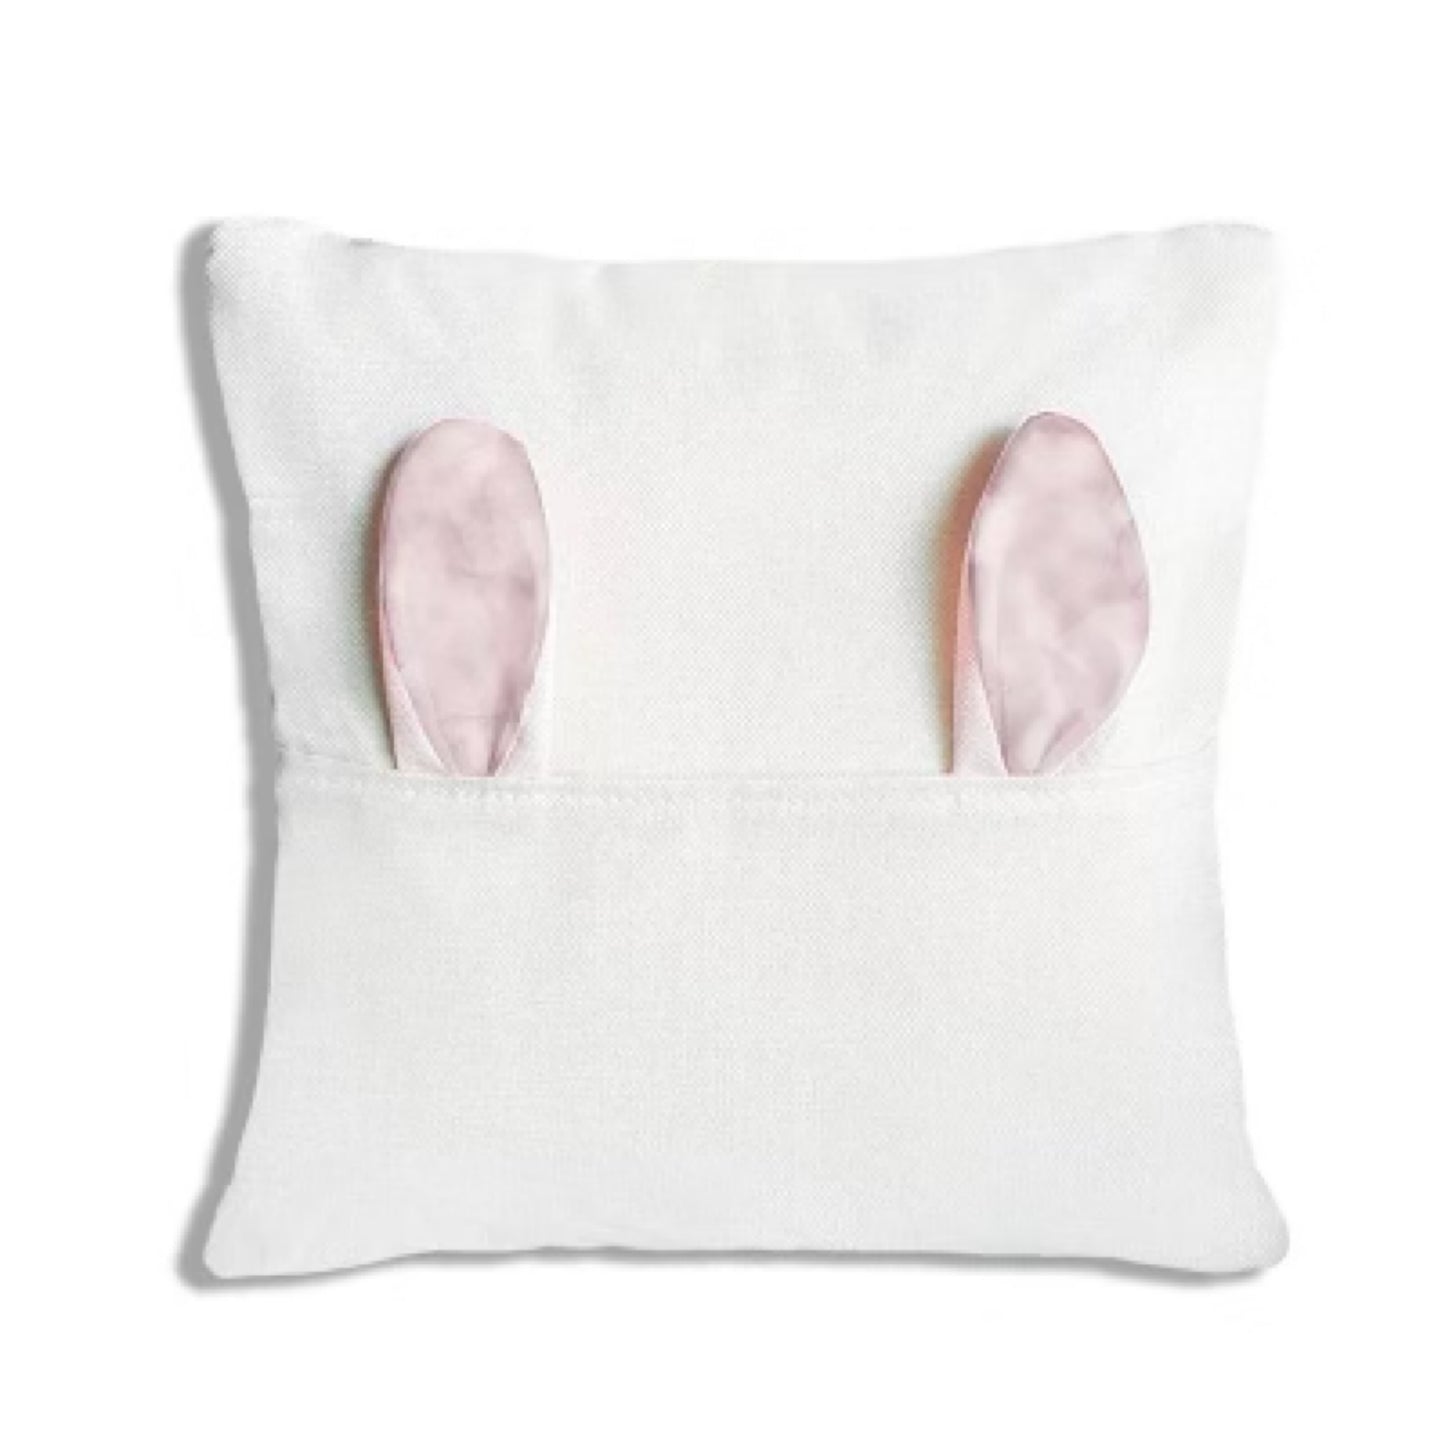 Bunny Pocket Pillow Cover Sublimation Blanks, Easter Bunny Pillow cover blanks, Sublimation Linen Cushion Cover - Carolina Blanks  And More LLC